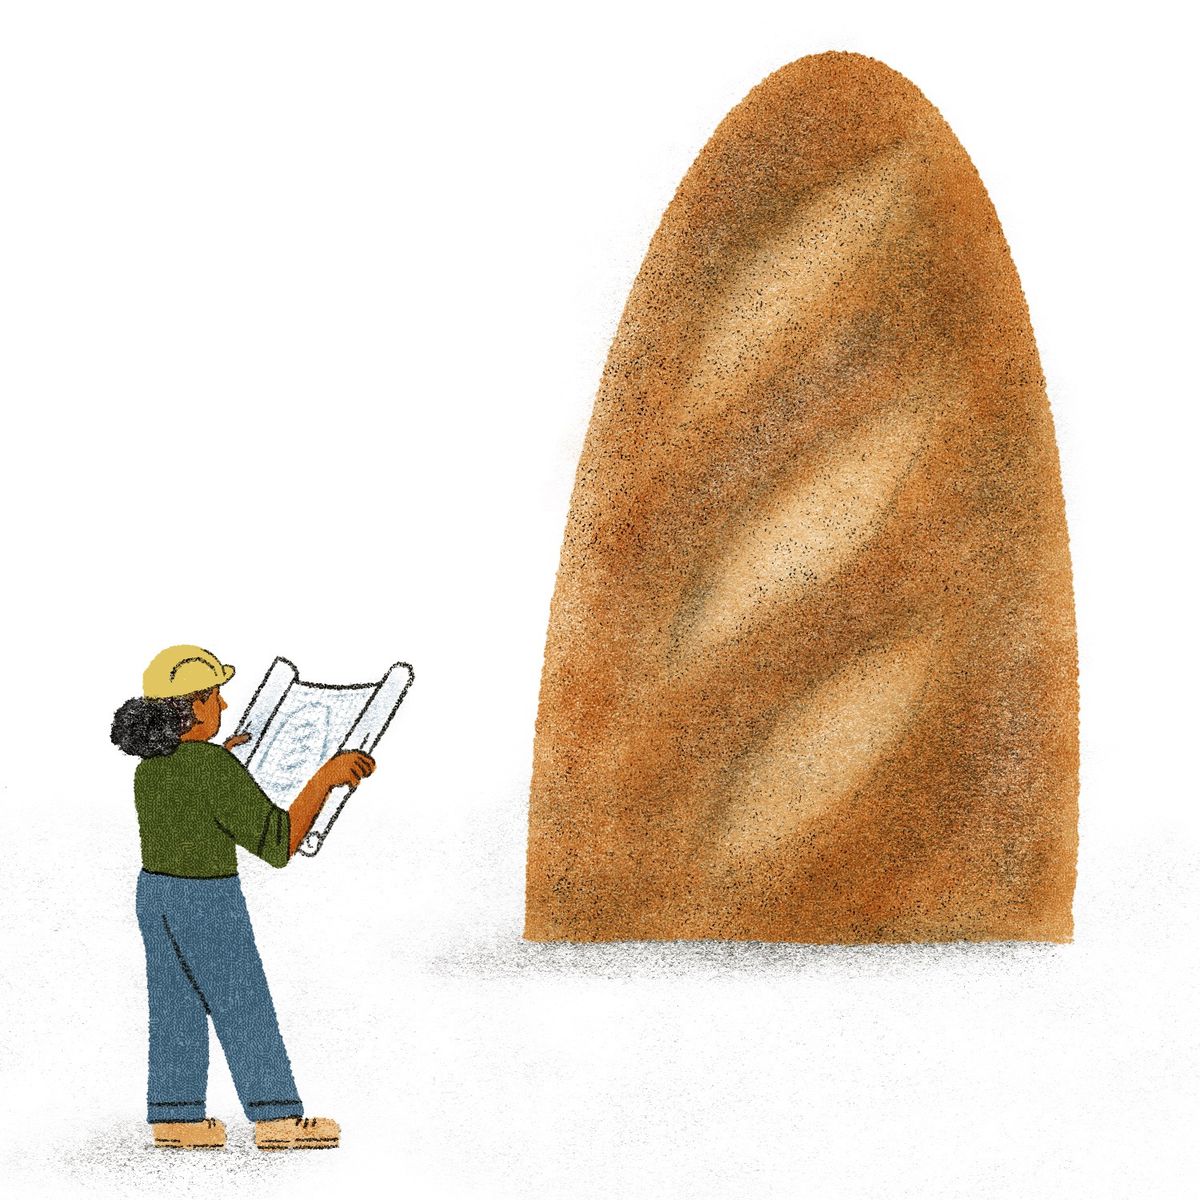 Illustration of a construction worker holding up a blueprint in front of a half of a baguette towering from the ground.